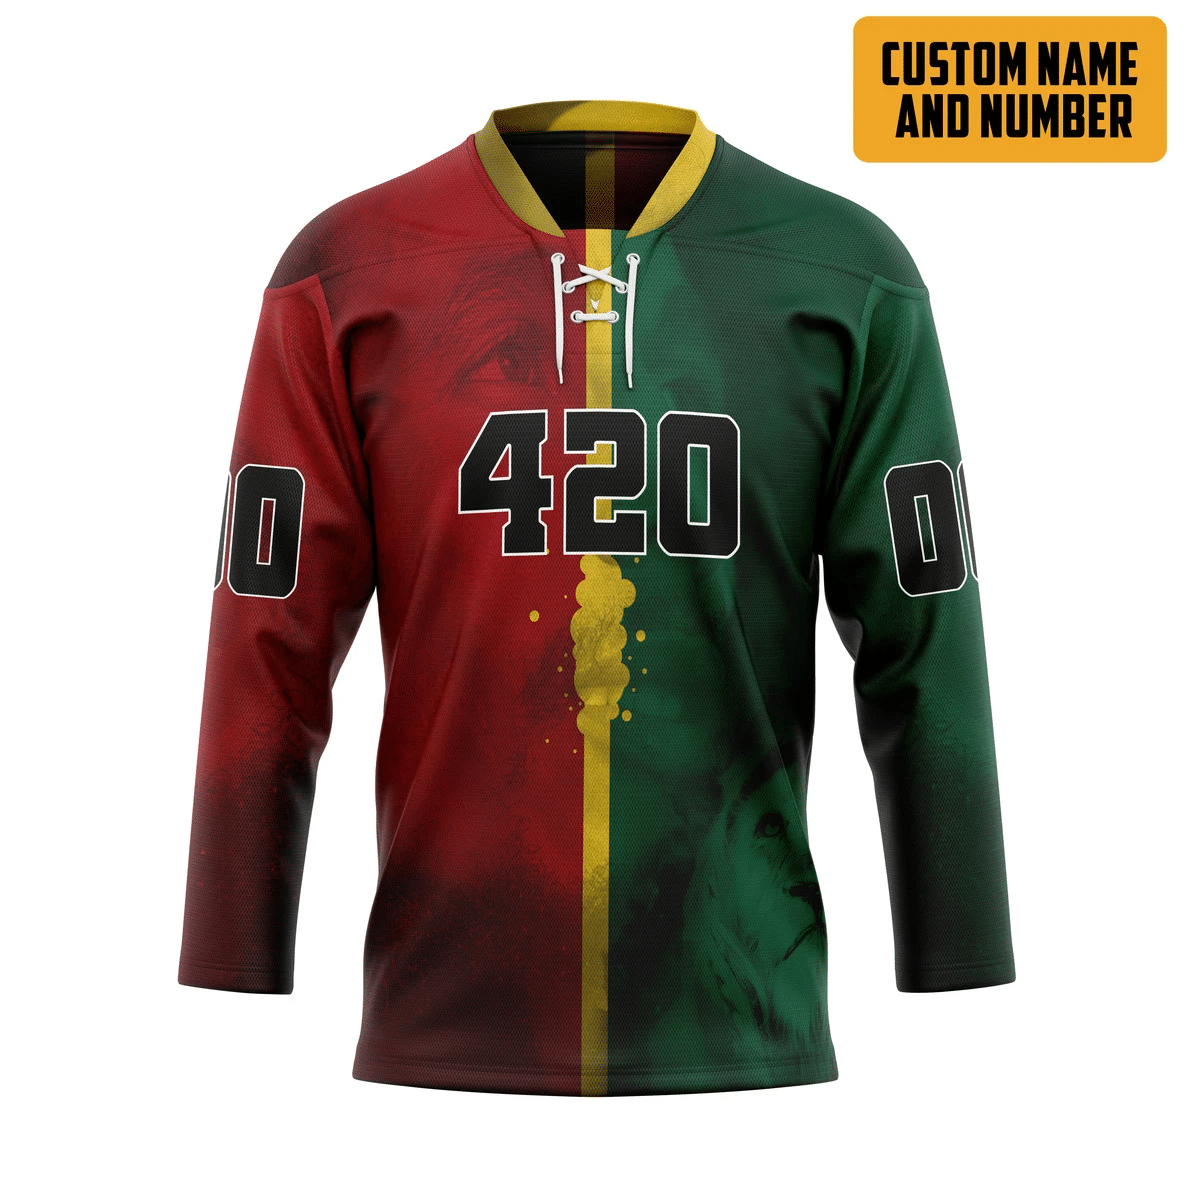 The style of a hockey jersey should match your personality. 55